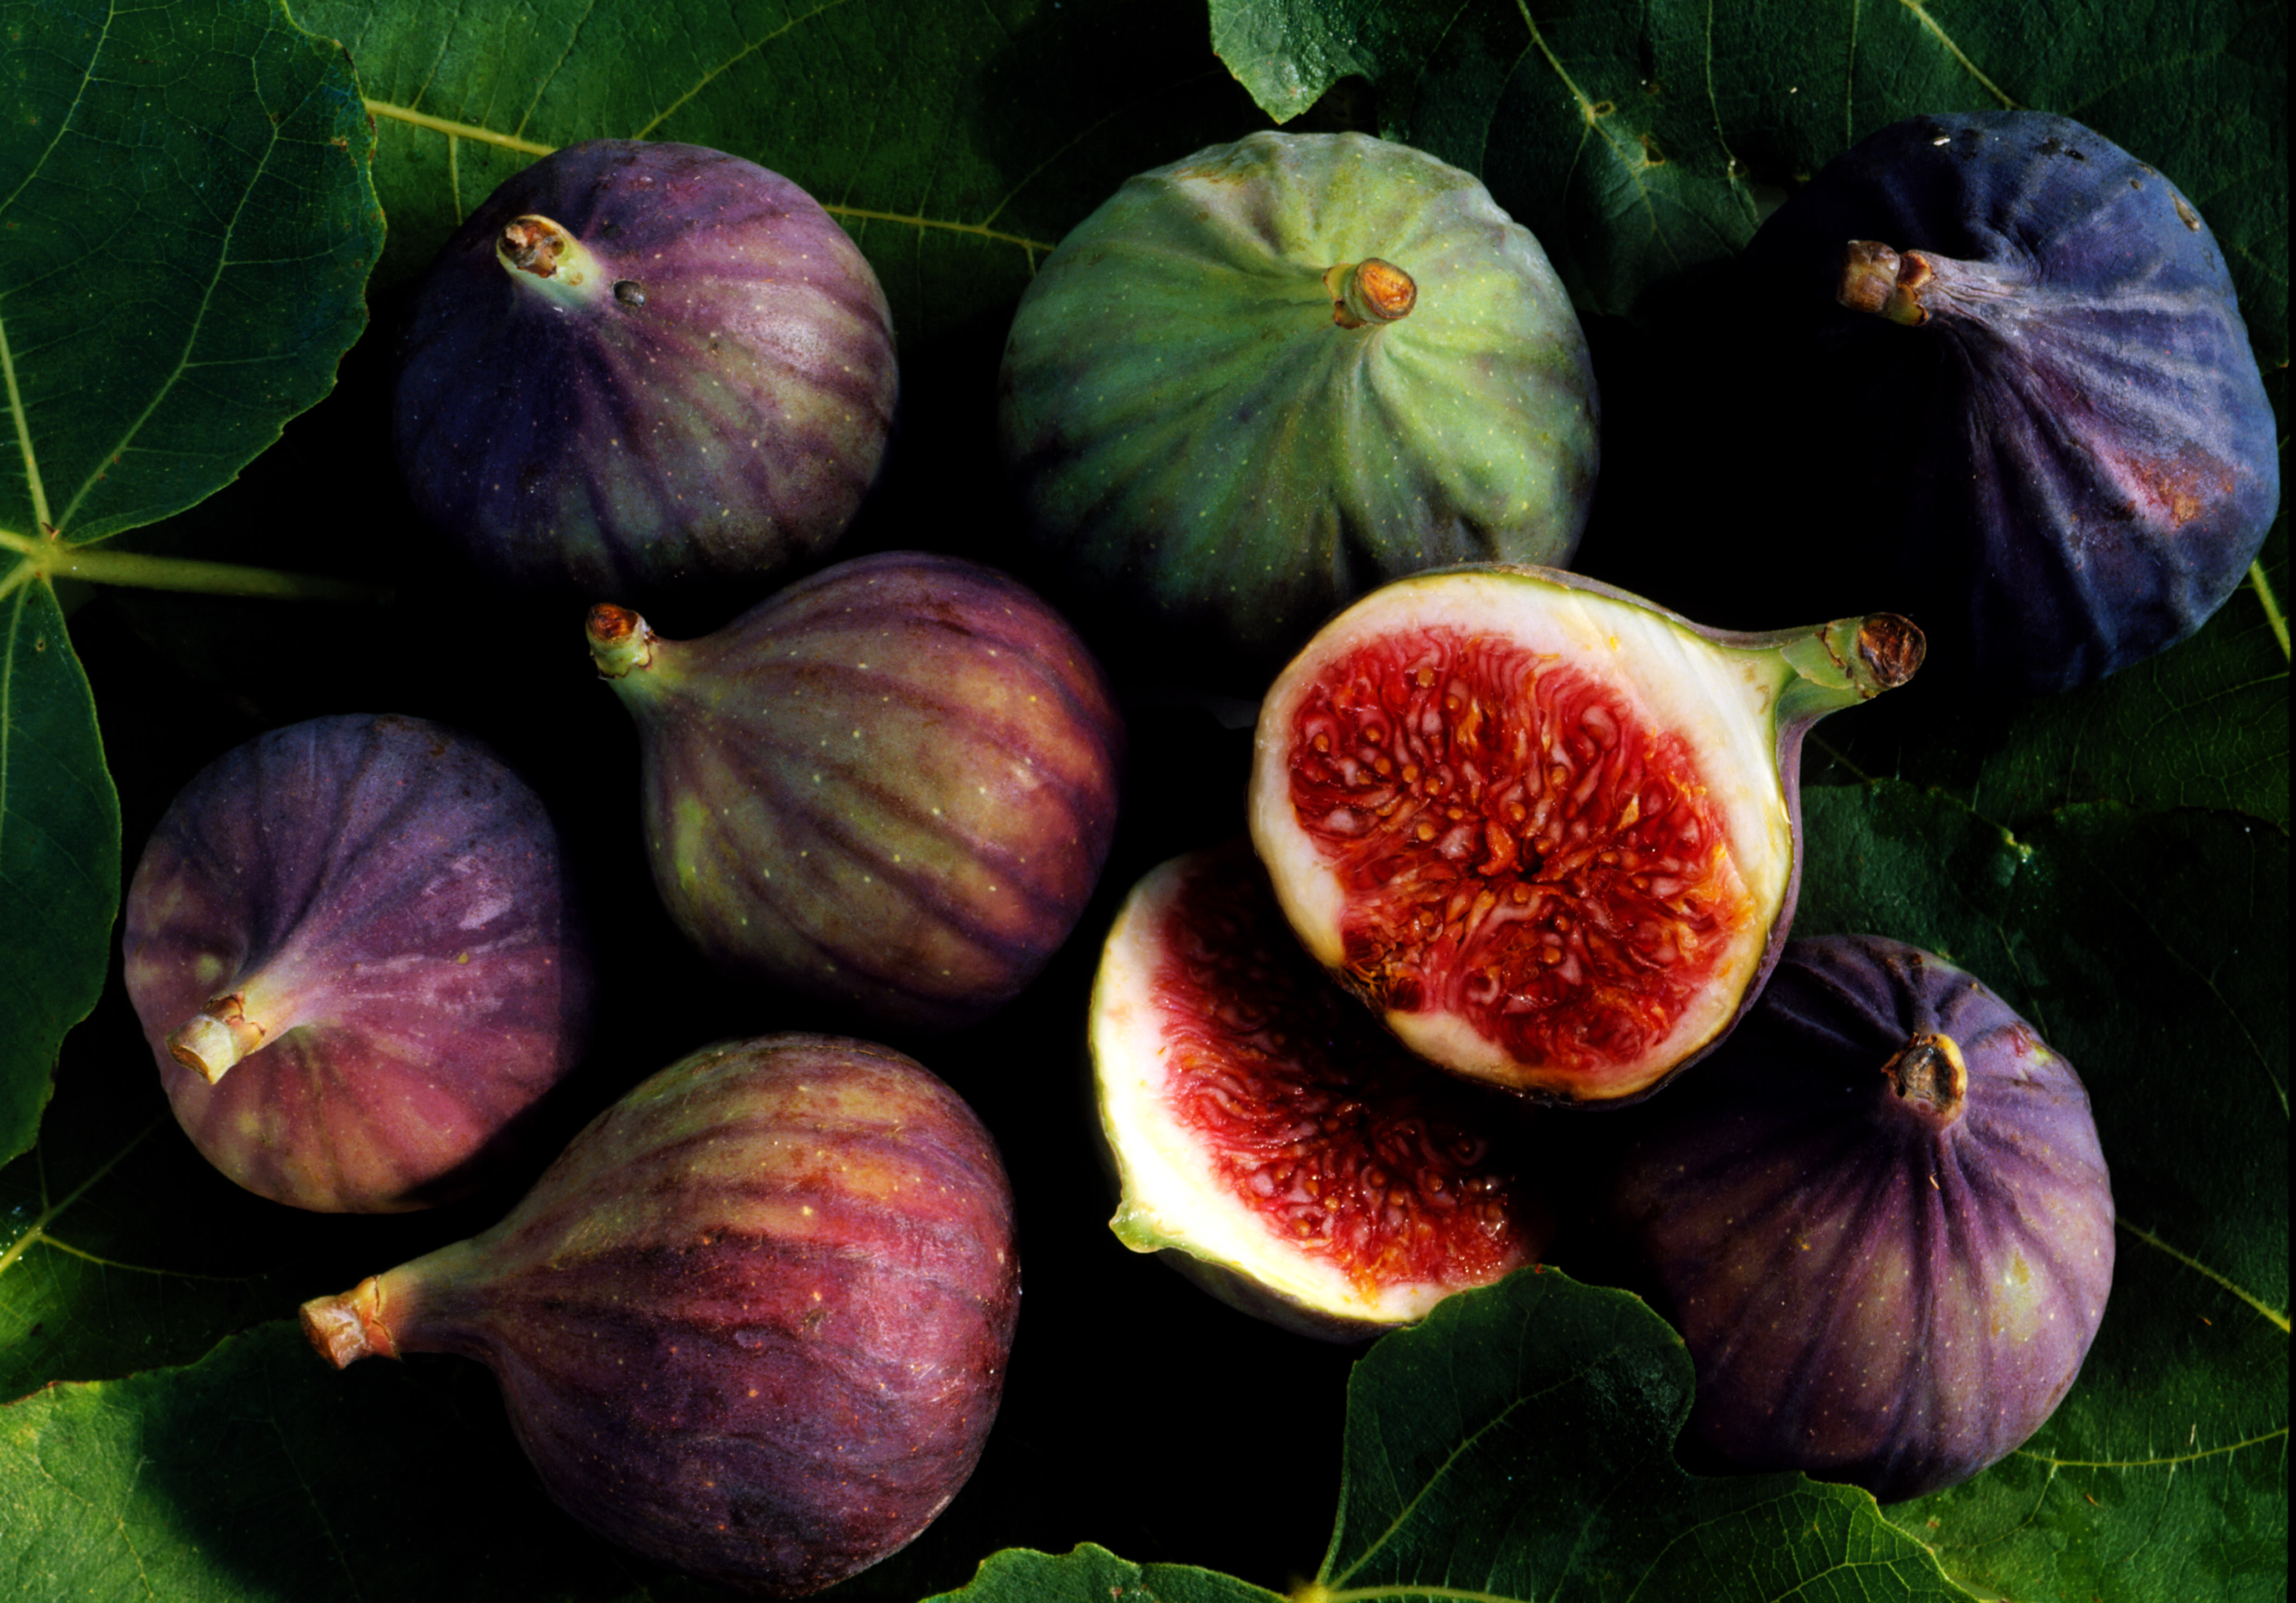 “There’s the early crop of figs this year, and there will be a second crop at the end of August,” says Madison who is based in New Mexico. Just rinse your figs and trim the stems before eating.